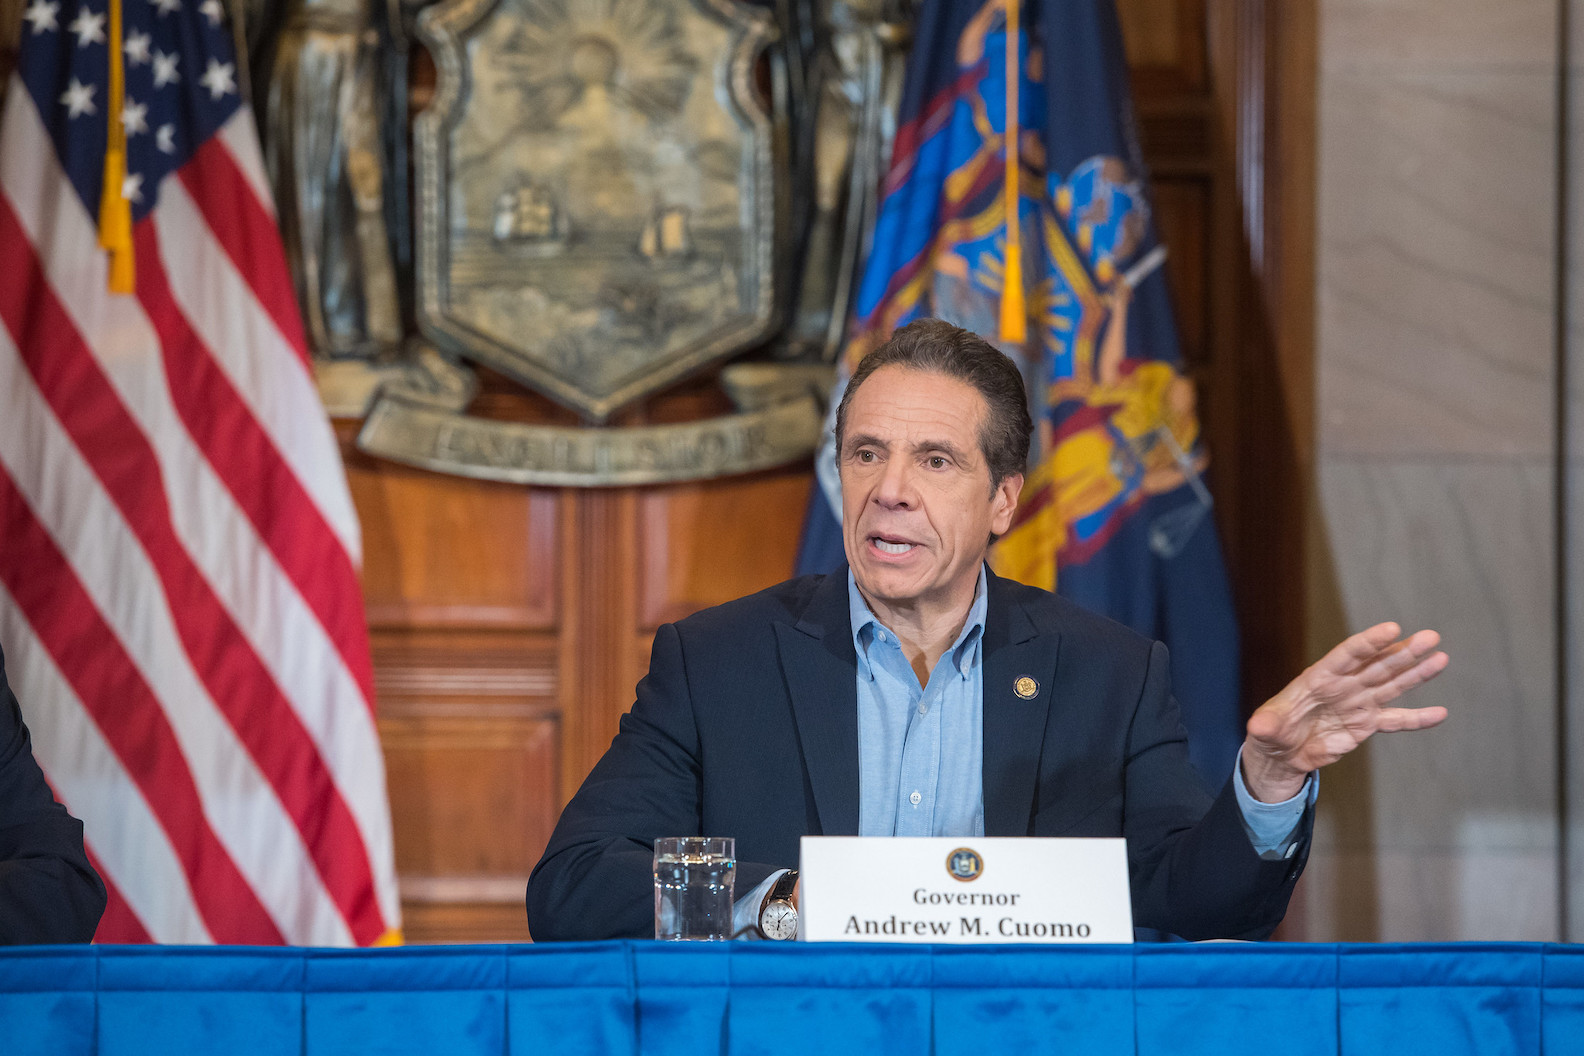 Gov. Andrew Cuomo held a briefing Sunday on the coronavirus. He called on President Donald Trump to mobilize the military/Army Corp of Engineers to build hospitals to increase capacity (Photo credit: Darren McGee/Office of Gov. Andrew Cuomo)